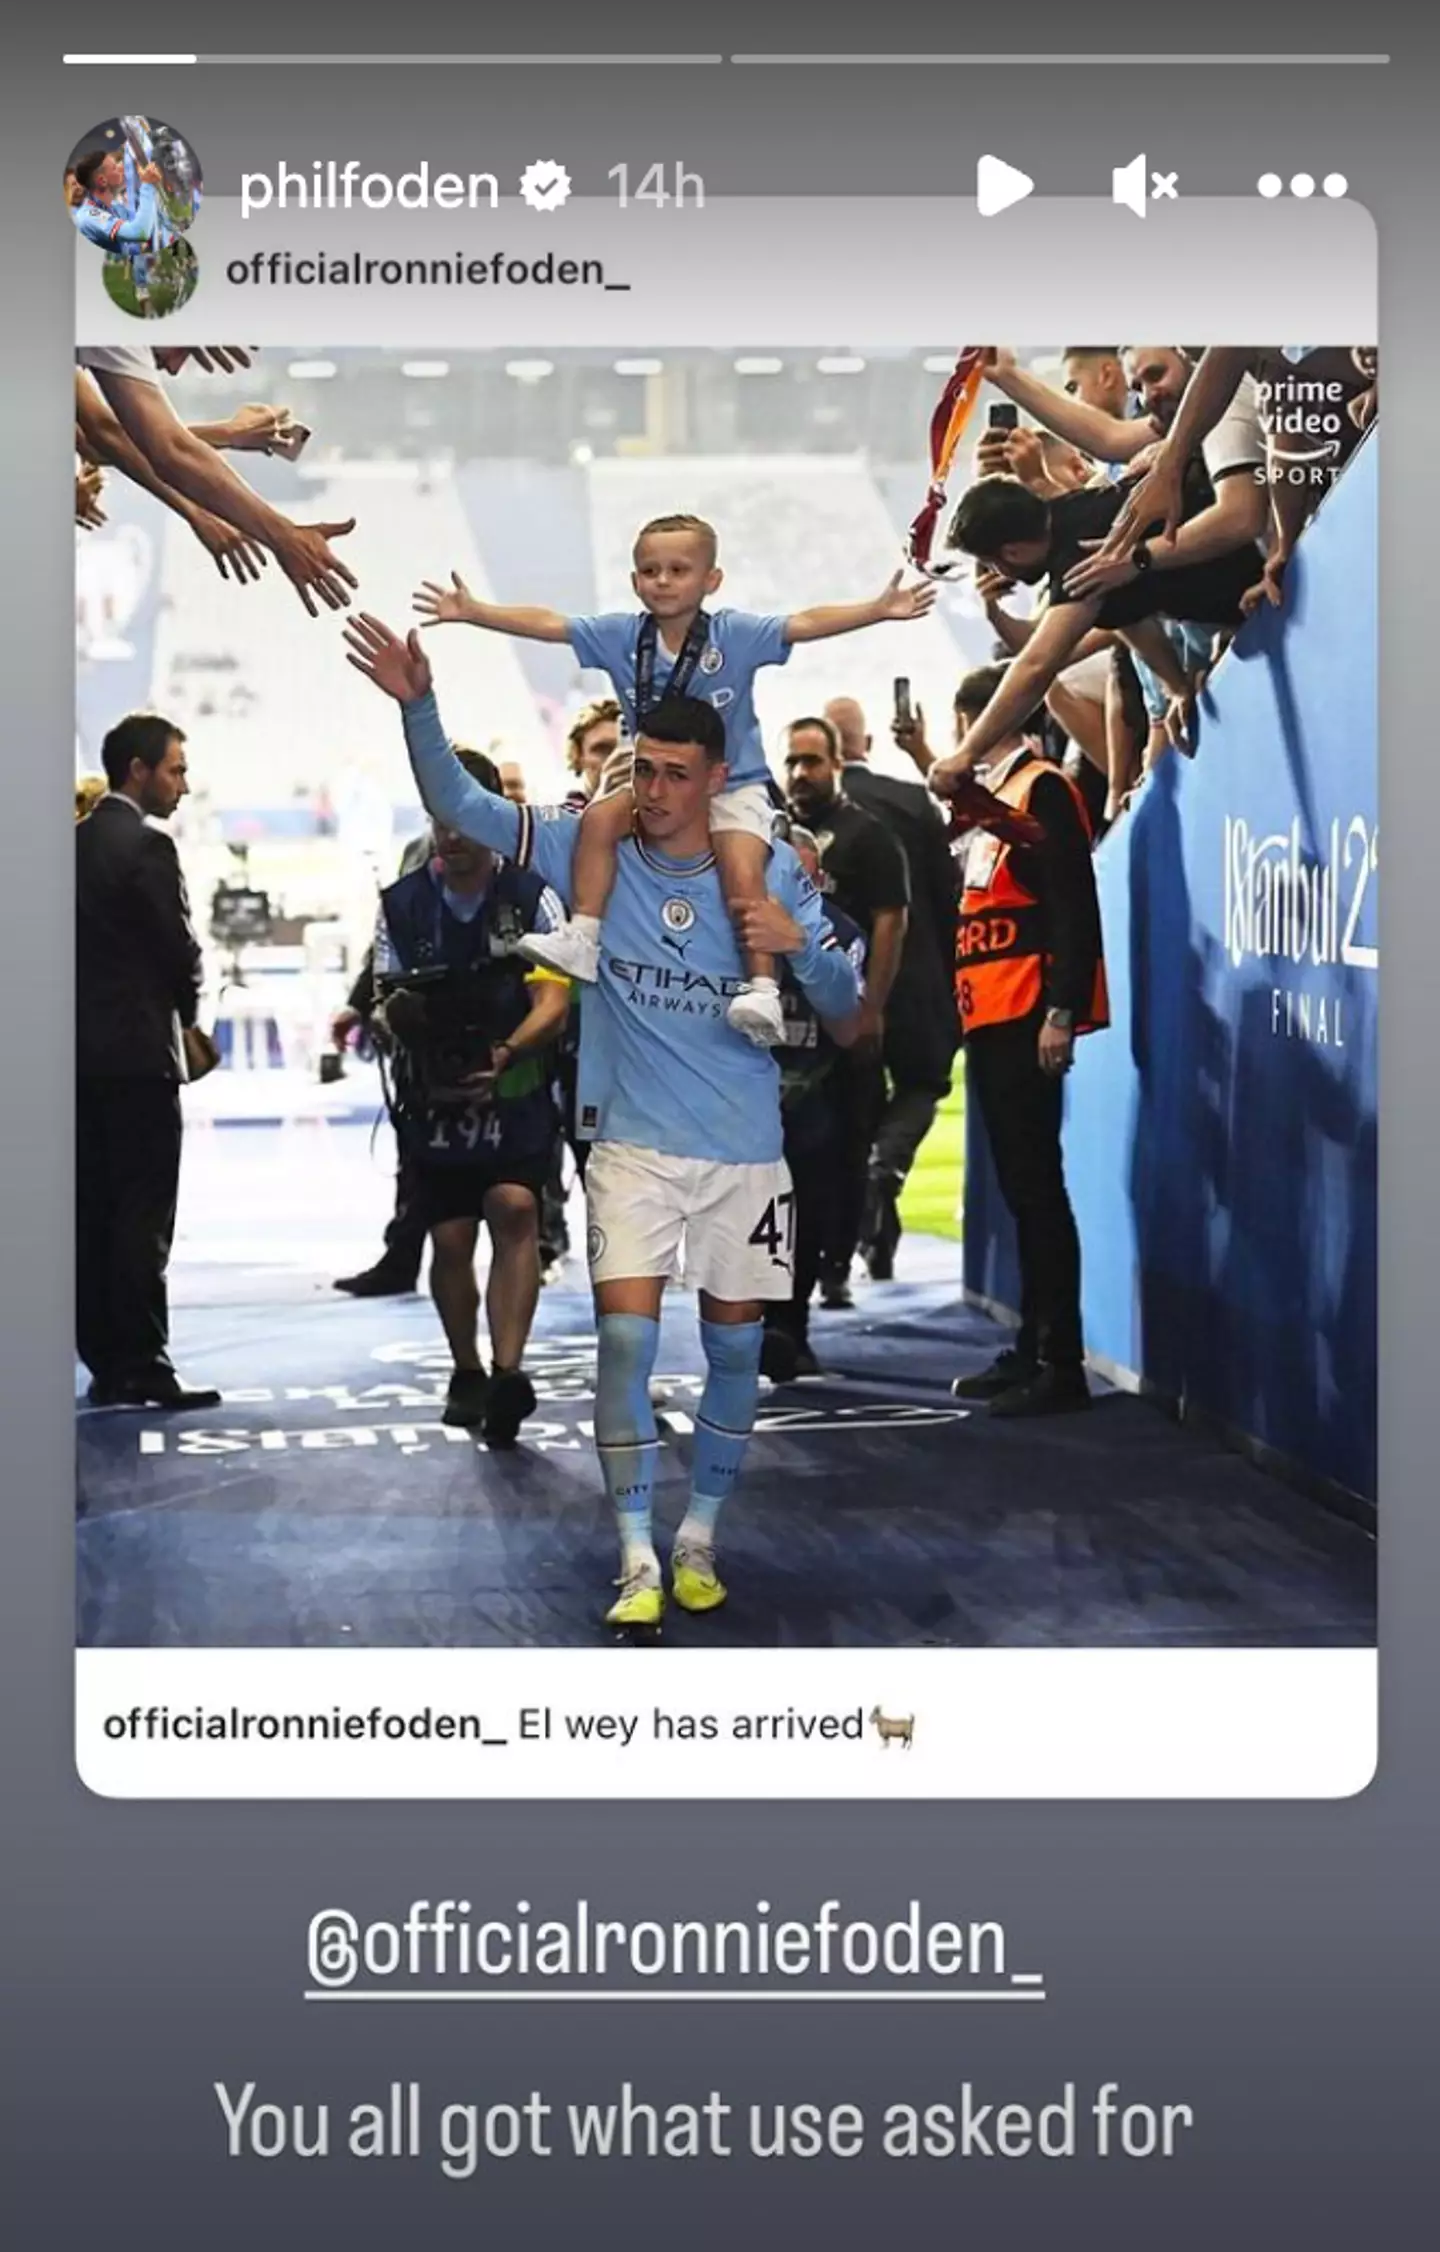 Phil Foden's post on his Instagram story.